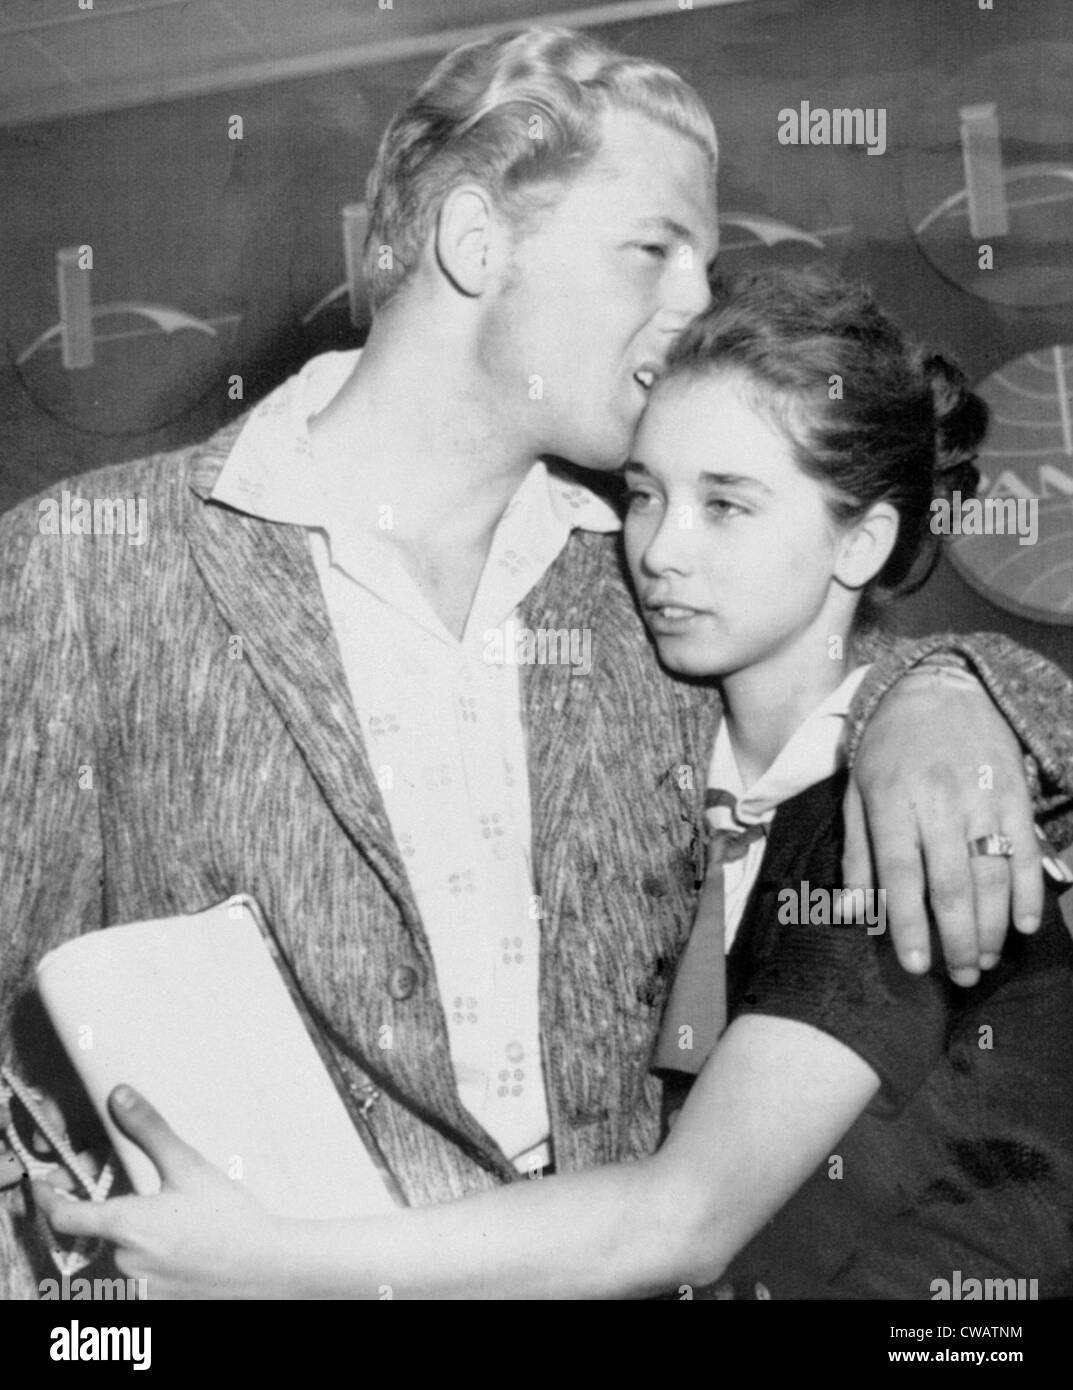 Jerry Lee Lewis kisses his bride Myra, age 13, NYC, 05-28-58.. Courtesy: CSU Archives / Everett Collection Stock Photo